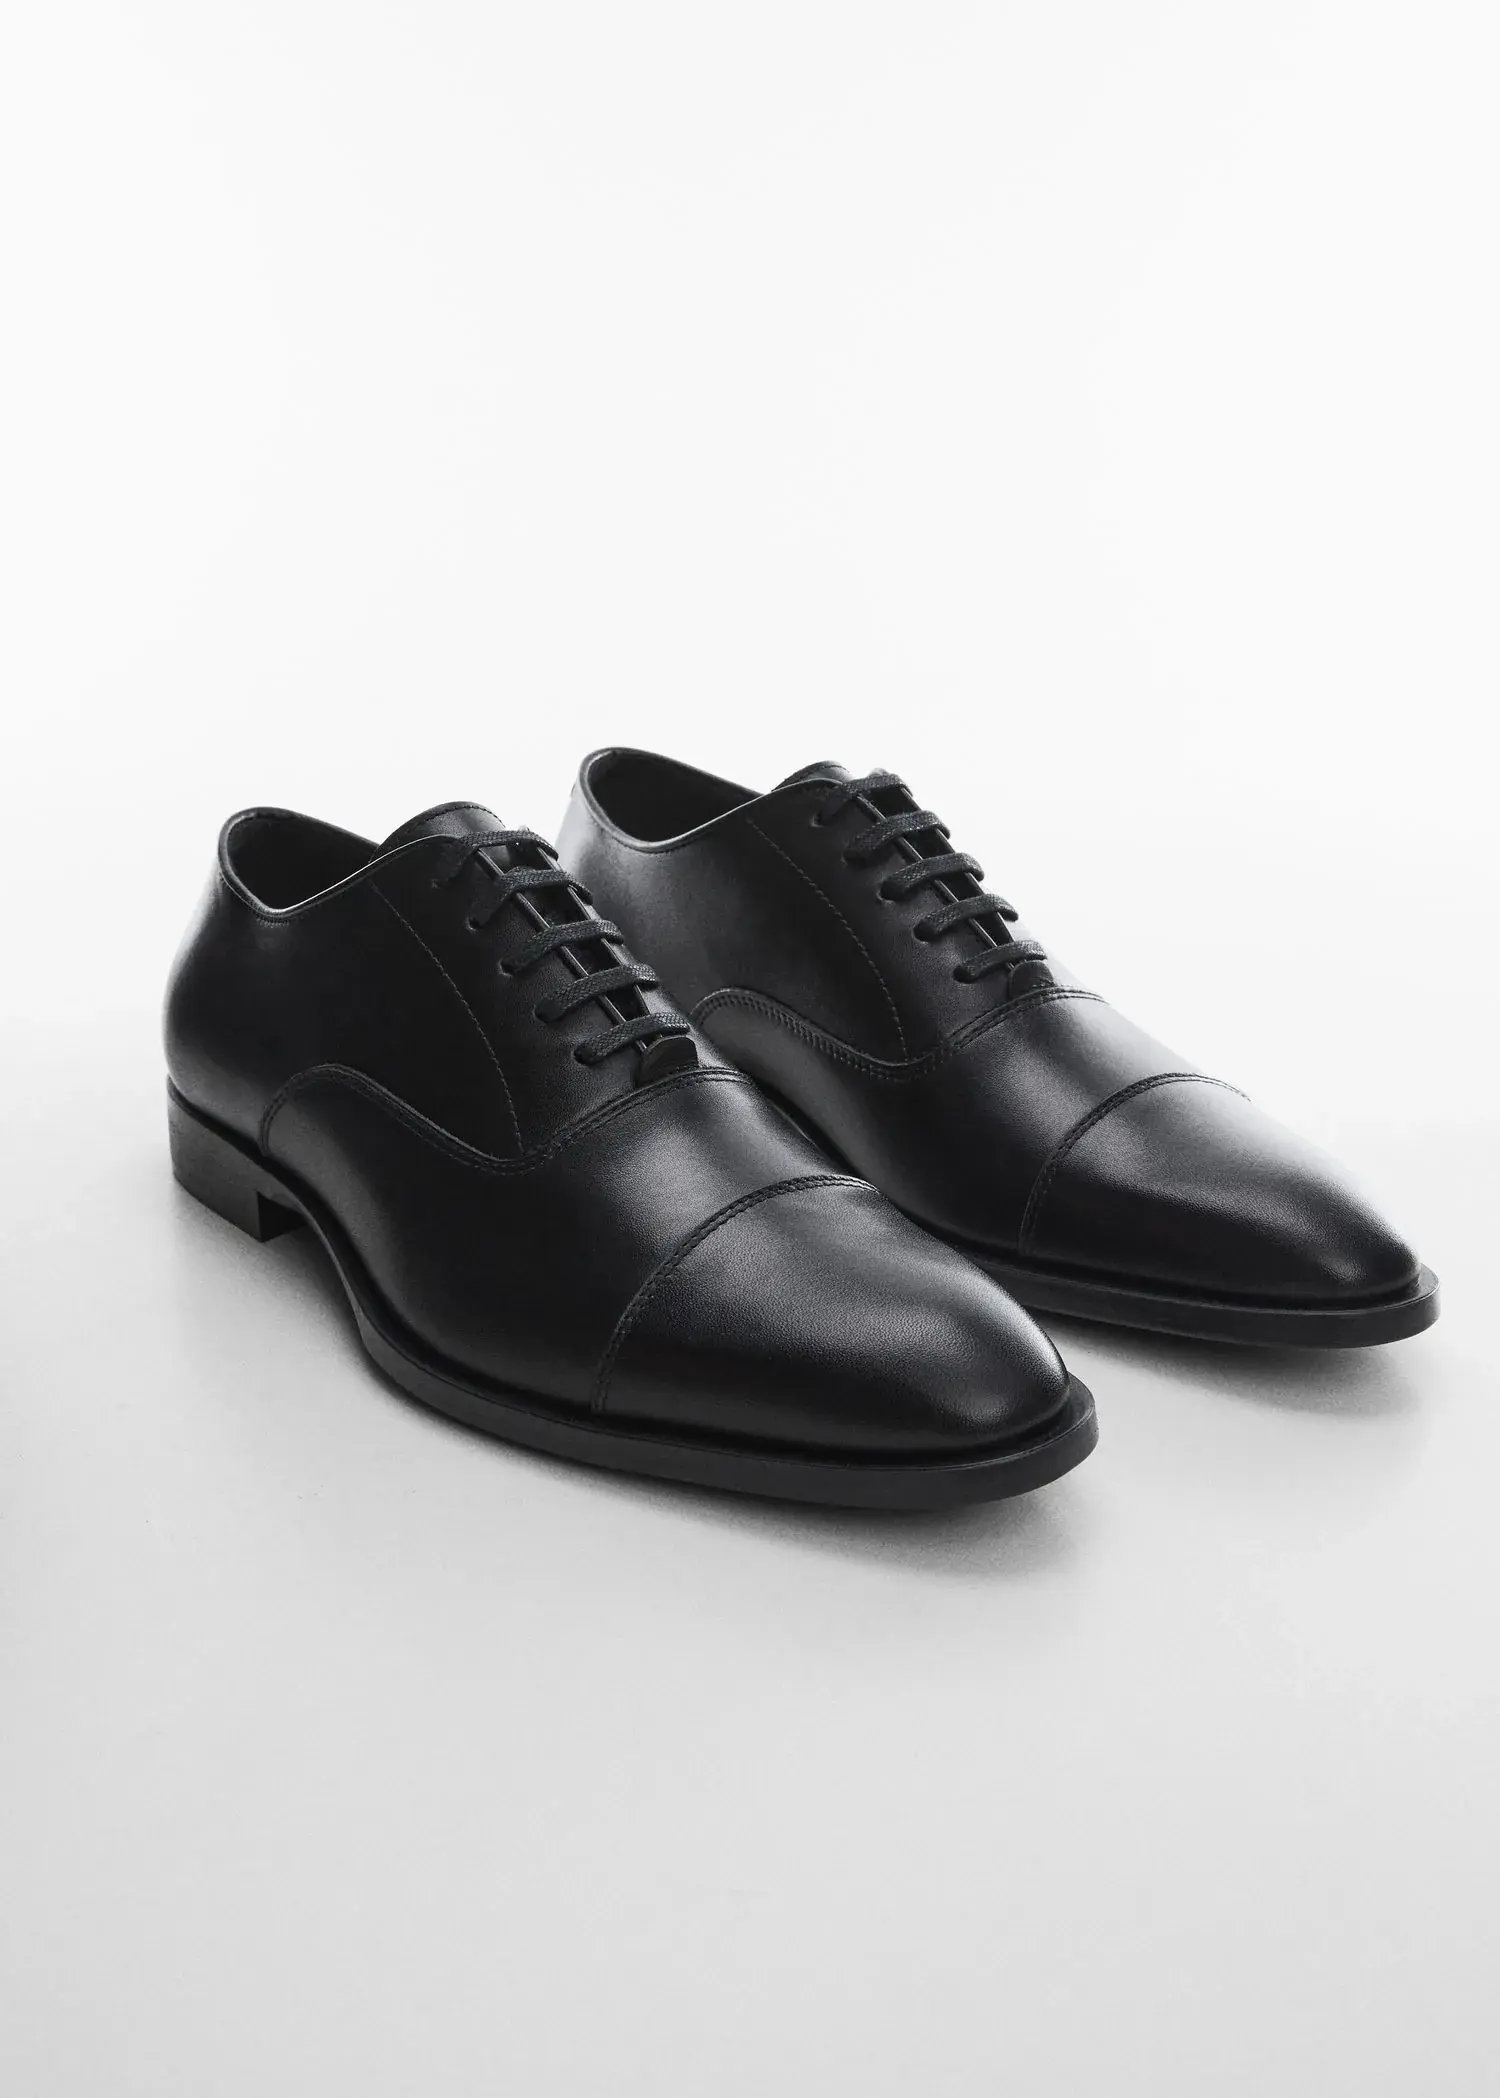 Mango Elongated leather suit shoes. a pair of black dress shoes sitting on top of a table. 